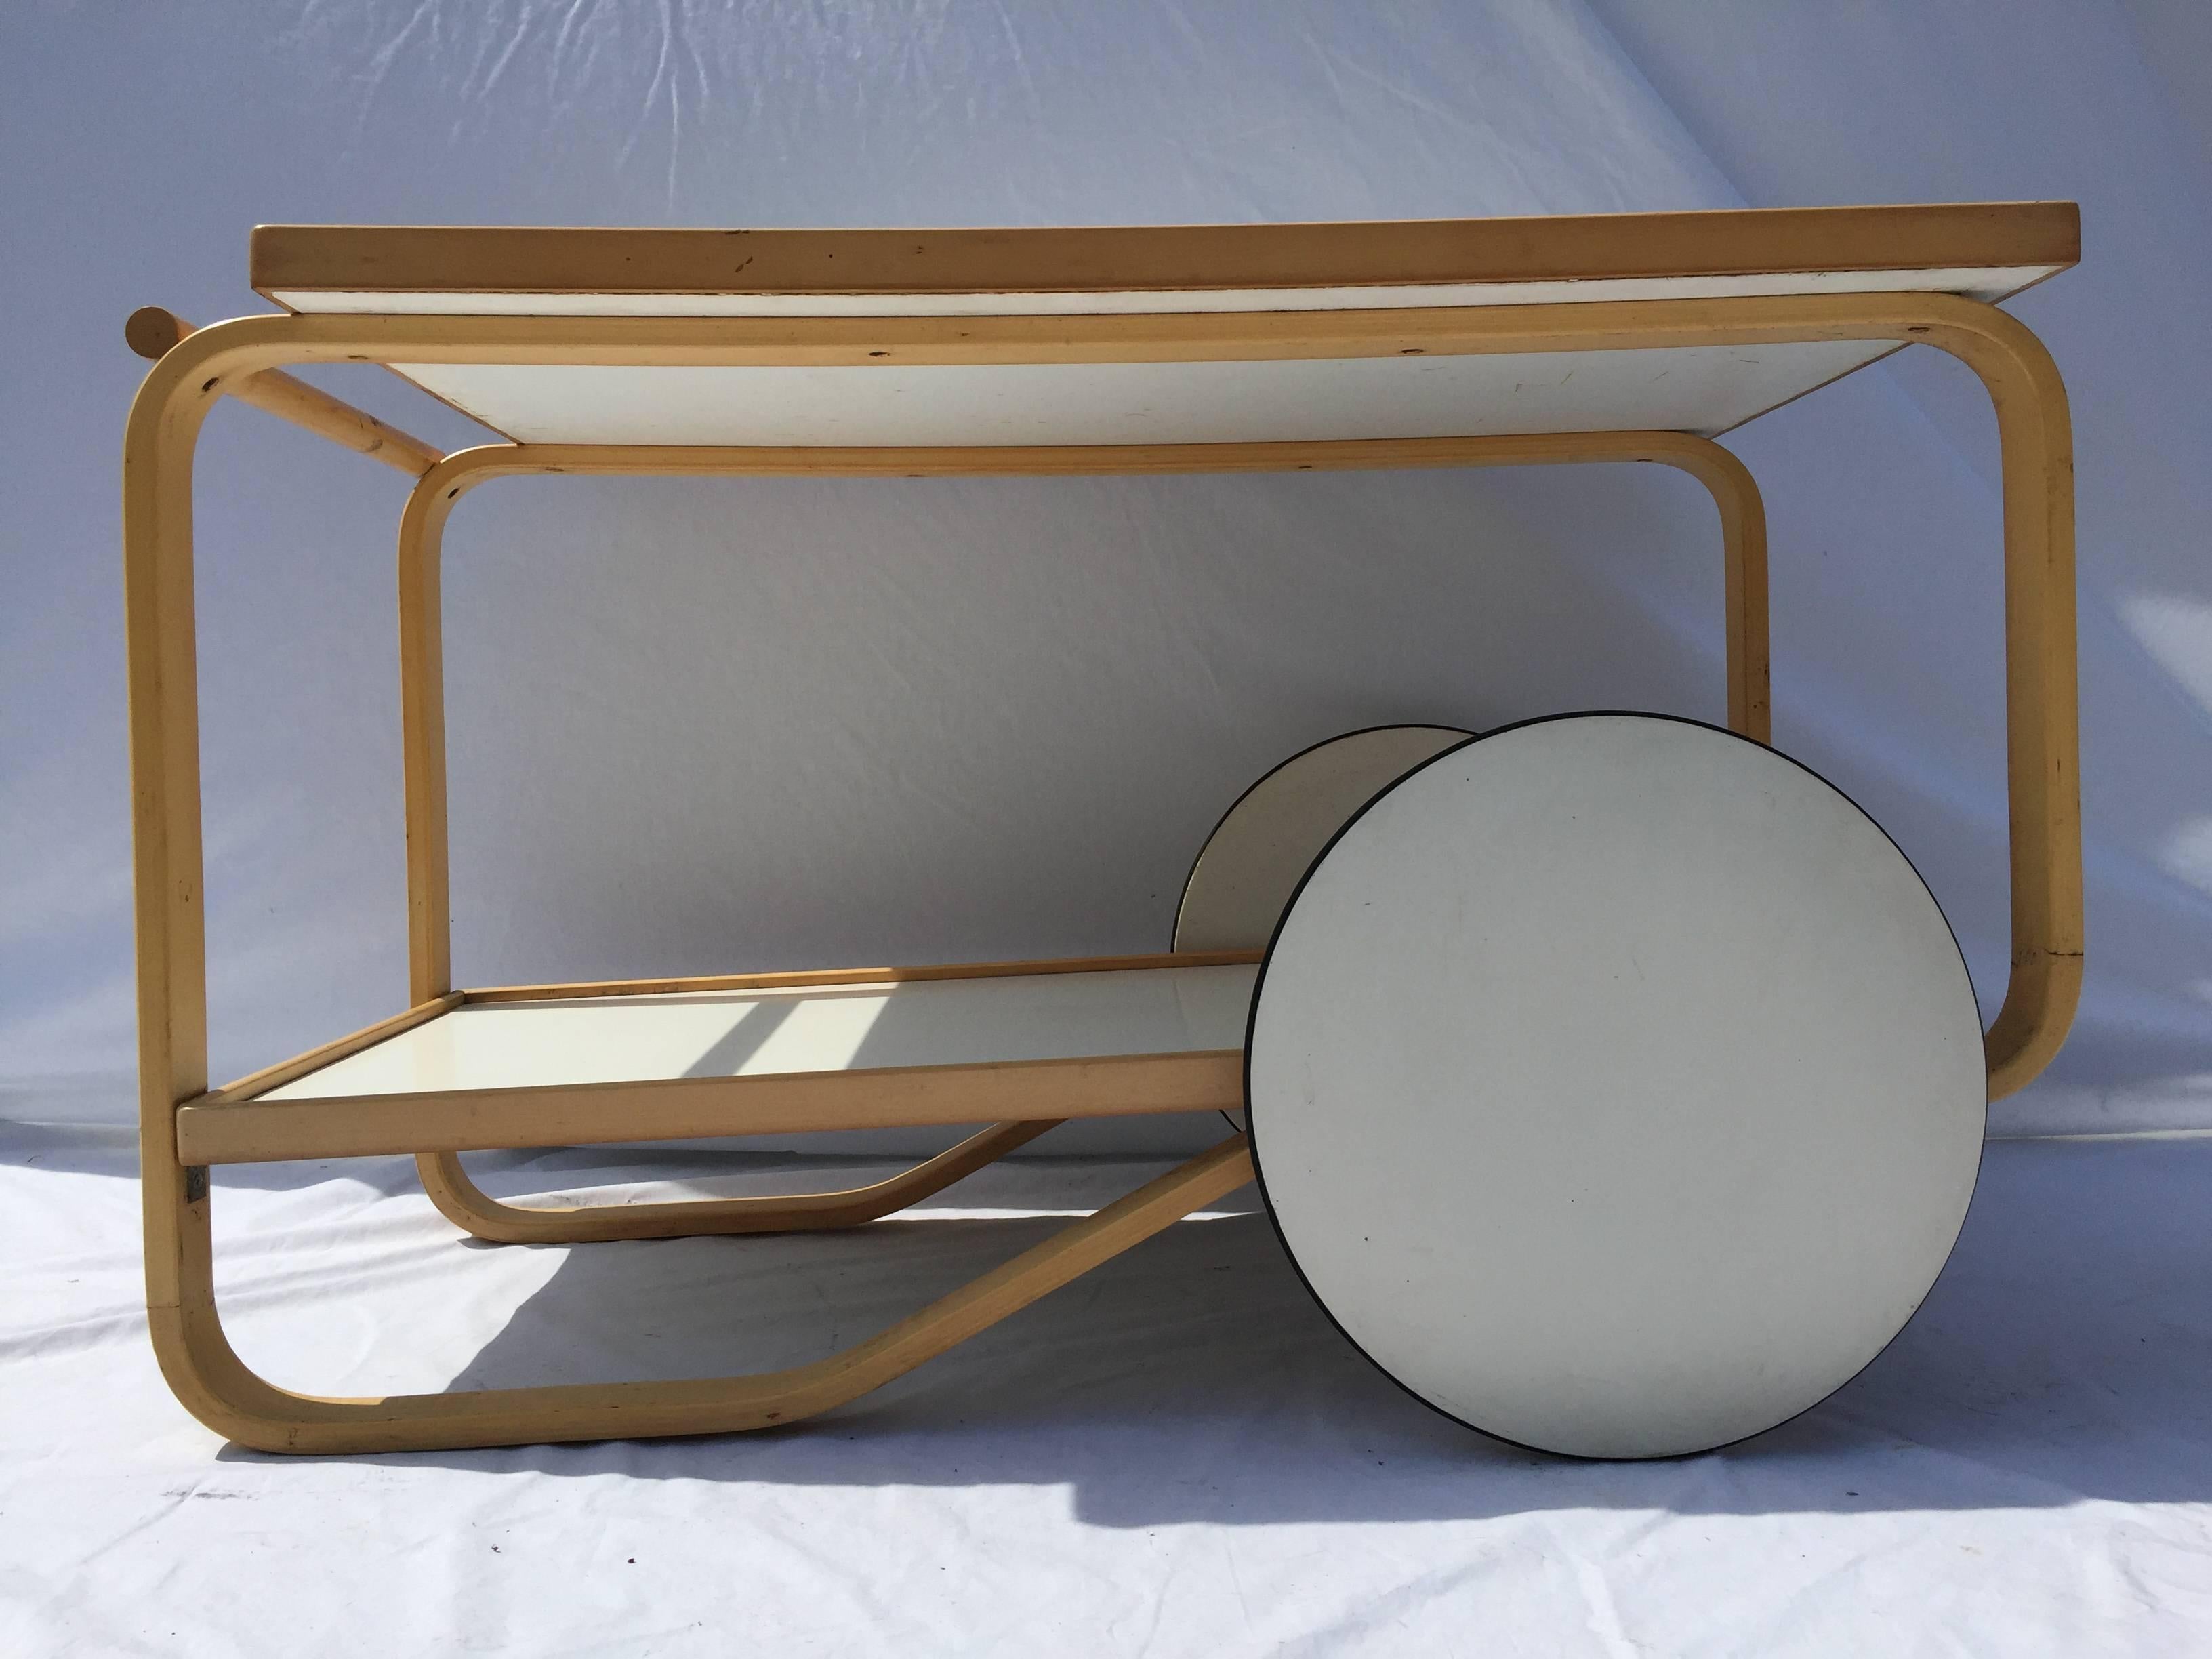 Tea for two and two for tea, me for you and you for me. Or rather, you for Alvar, but that didn't rhyme as well. This is the iconic tea trolley, #901, designed by Alvar Aalto for Artek, Finland in 1936. Made of bent birch and rubber (on the wheels)